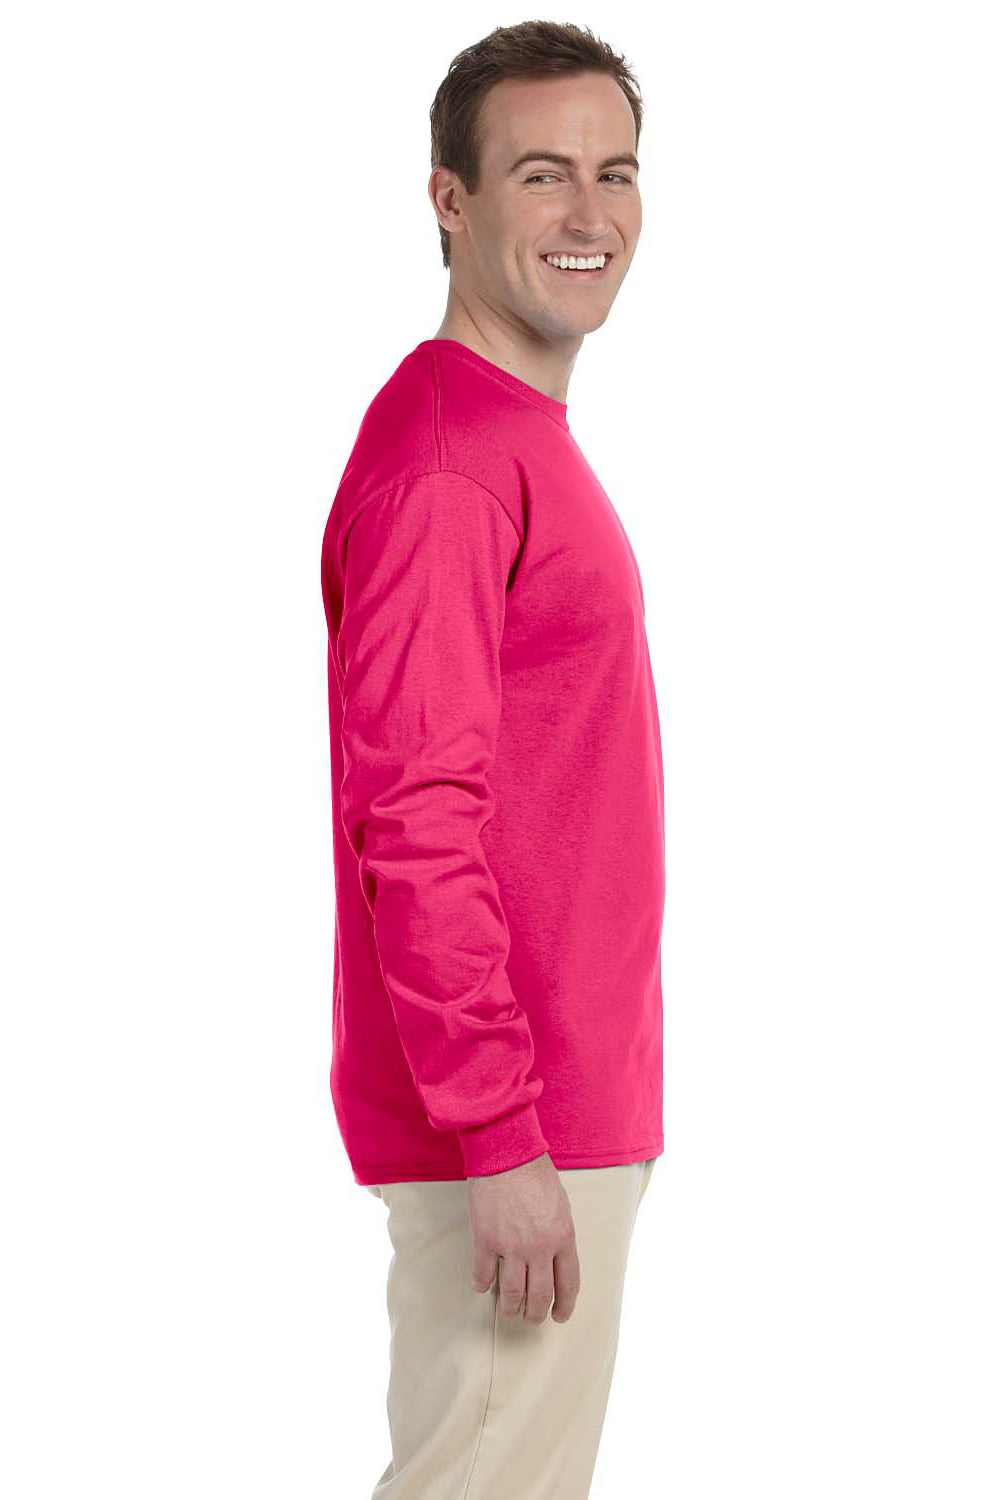 Fruit Of The Loom 4930 Mens HD Jersey Long Sleeve Crewneck T-Shirt Cyber Pink Side